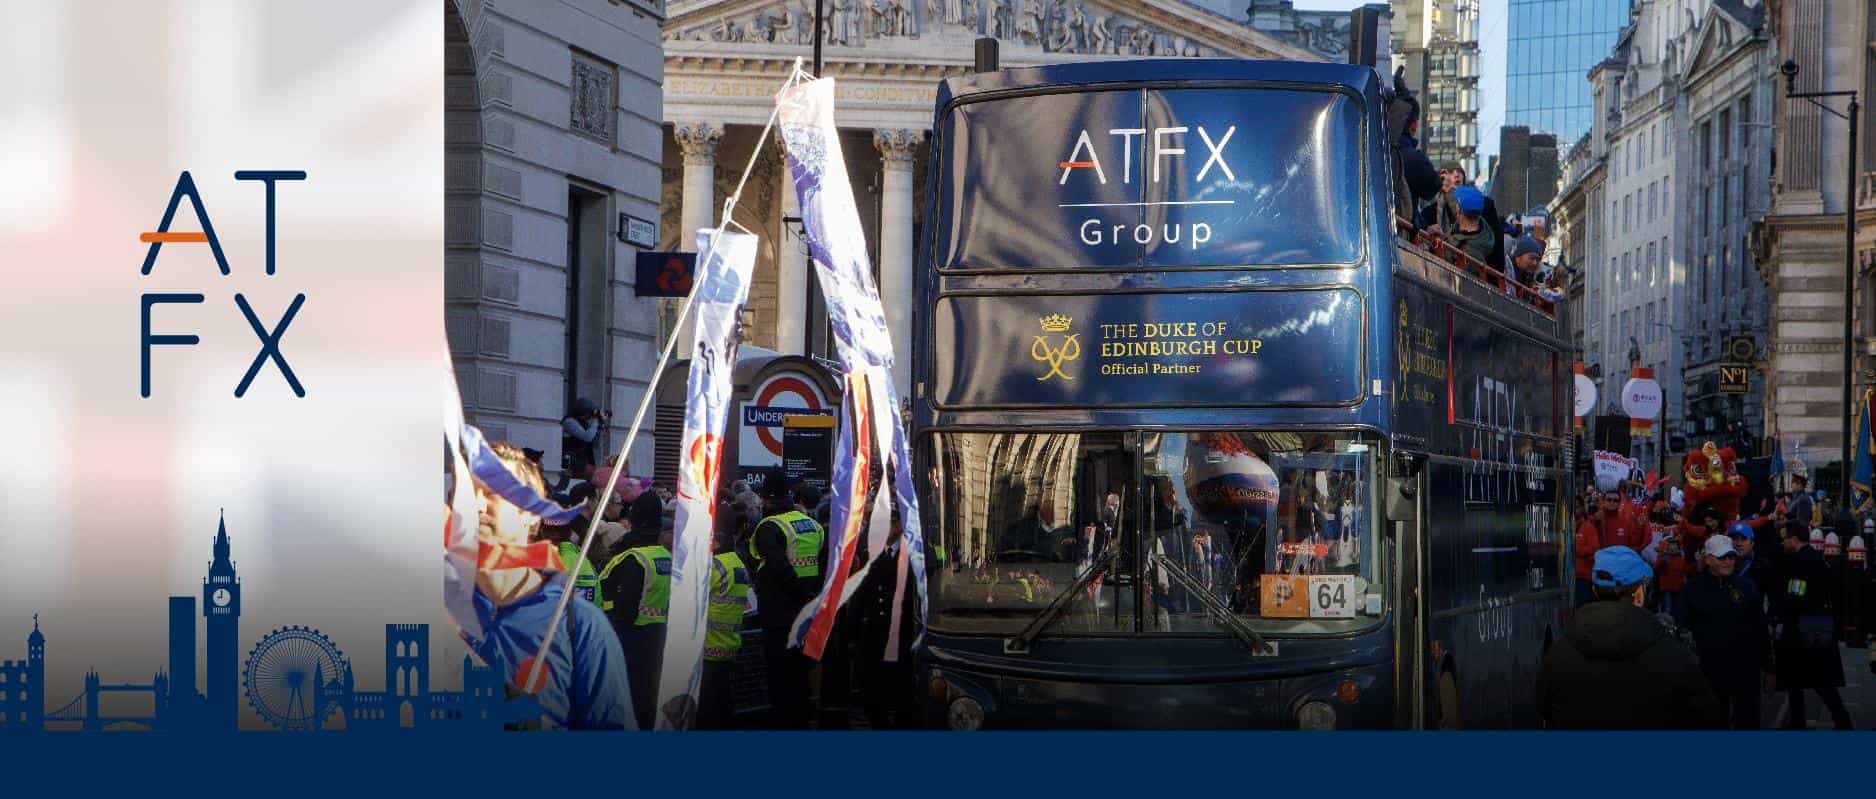 shine2023London Financial City Long Float Parade,ATFXBlue Tour Blooms with Smart Style620 / author:atfx2019 / PostsID:1726821